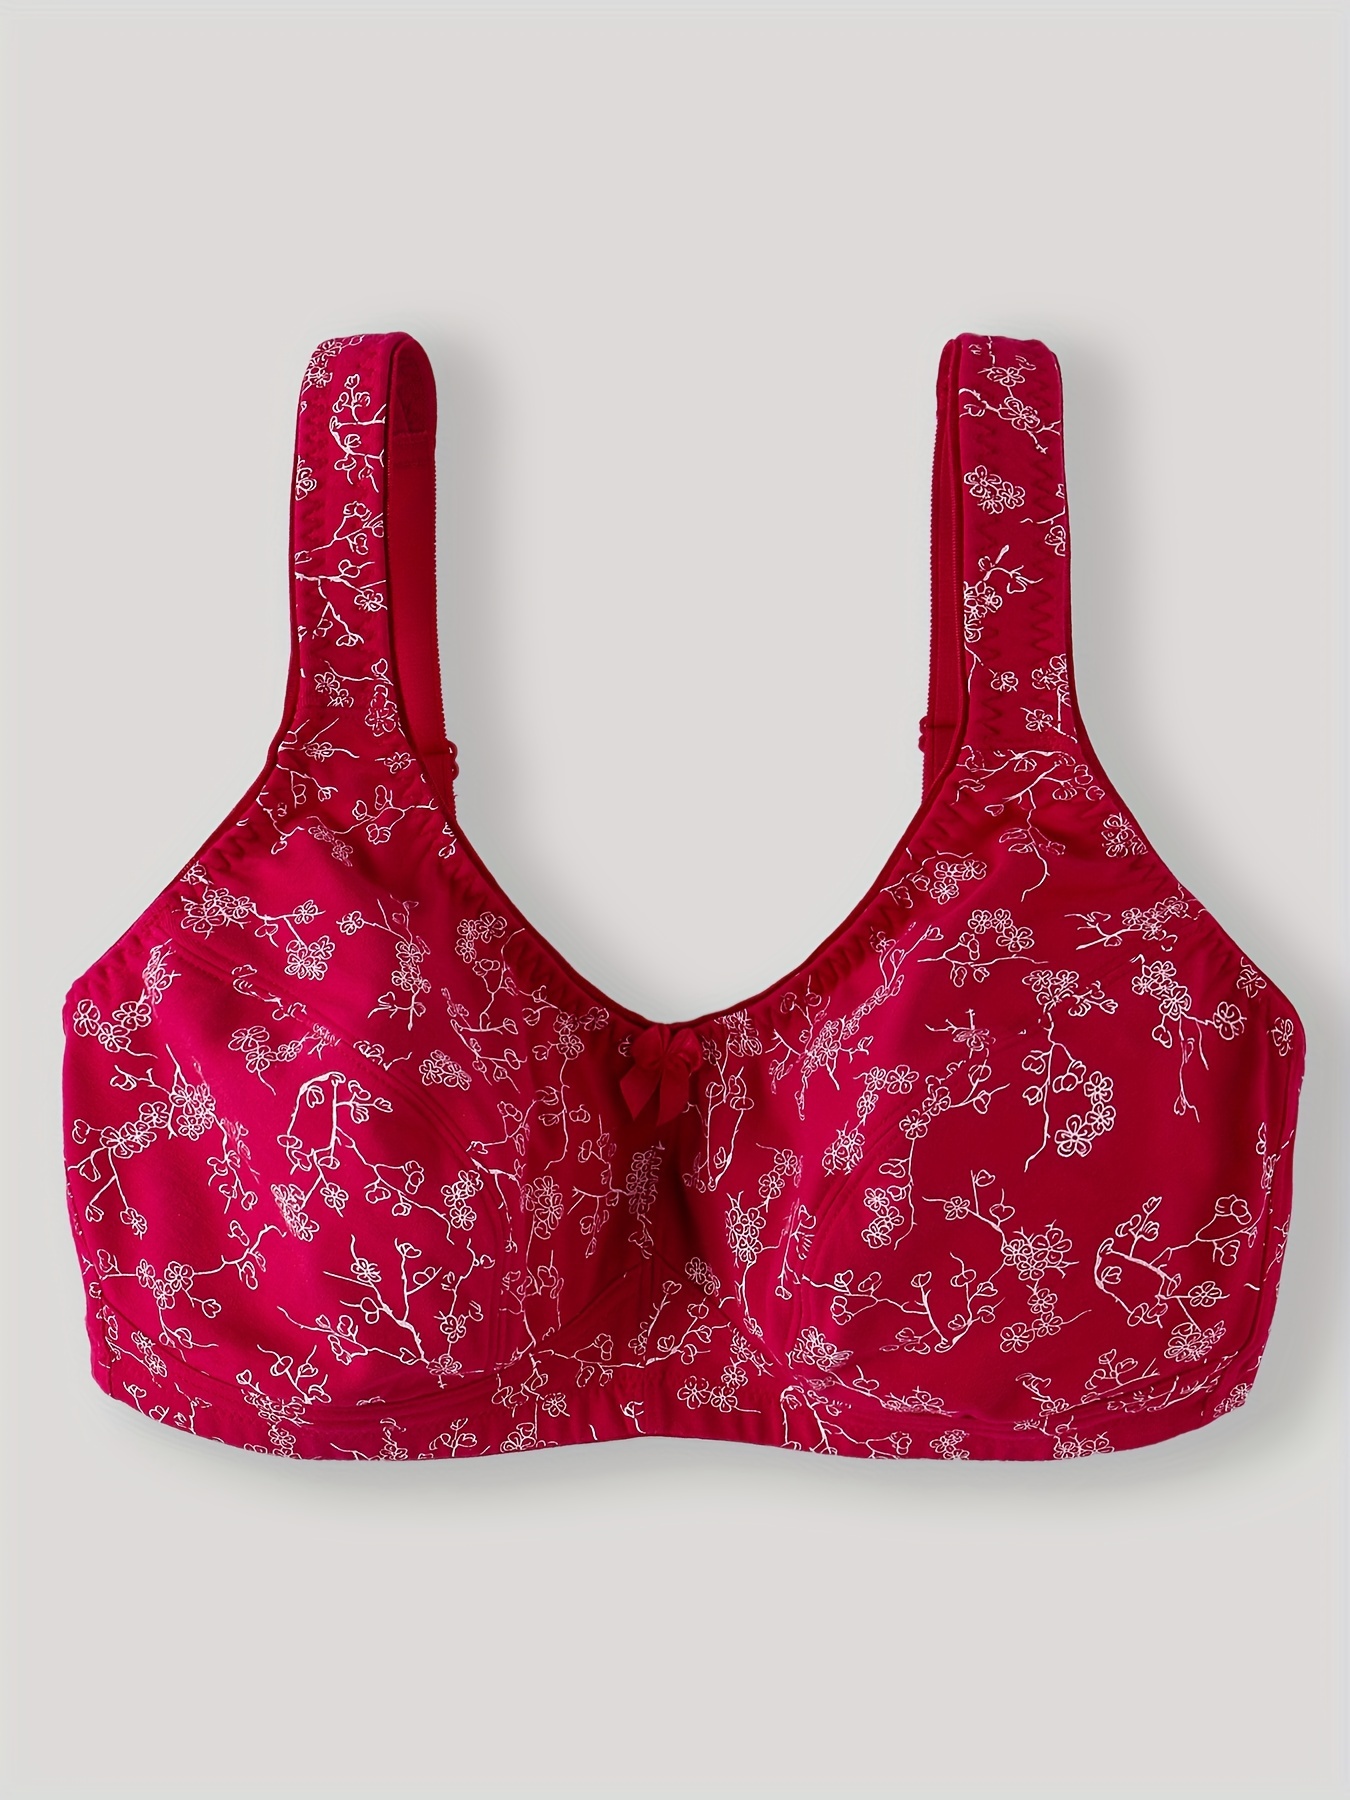 Plus Size Middle and Elderly Women Cotton Printed Bras Wireless Comfort  Thin Mold Cup Daily Bra (Color : Watermelon red, Size : 42/95 (BC))